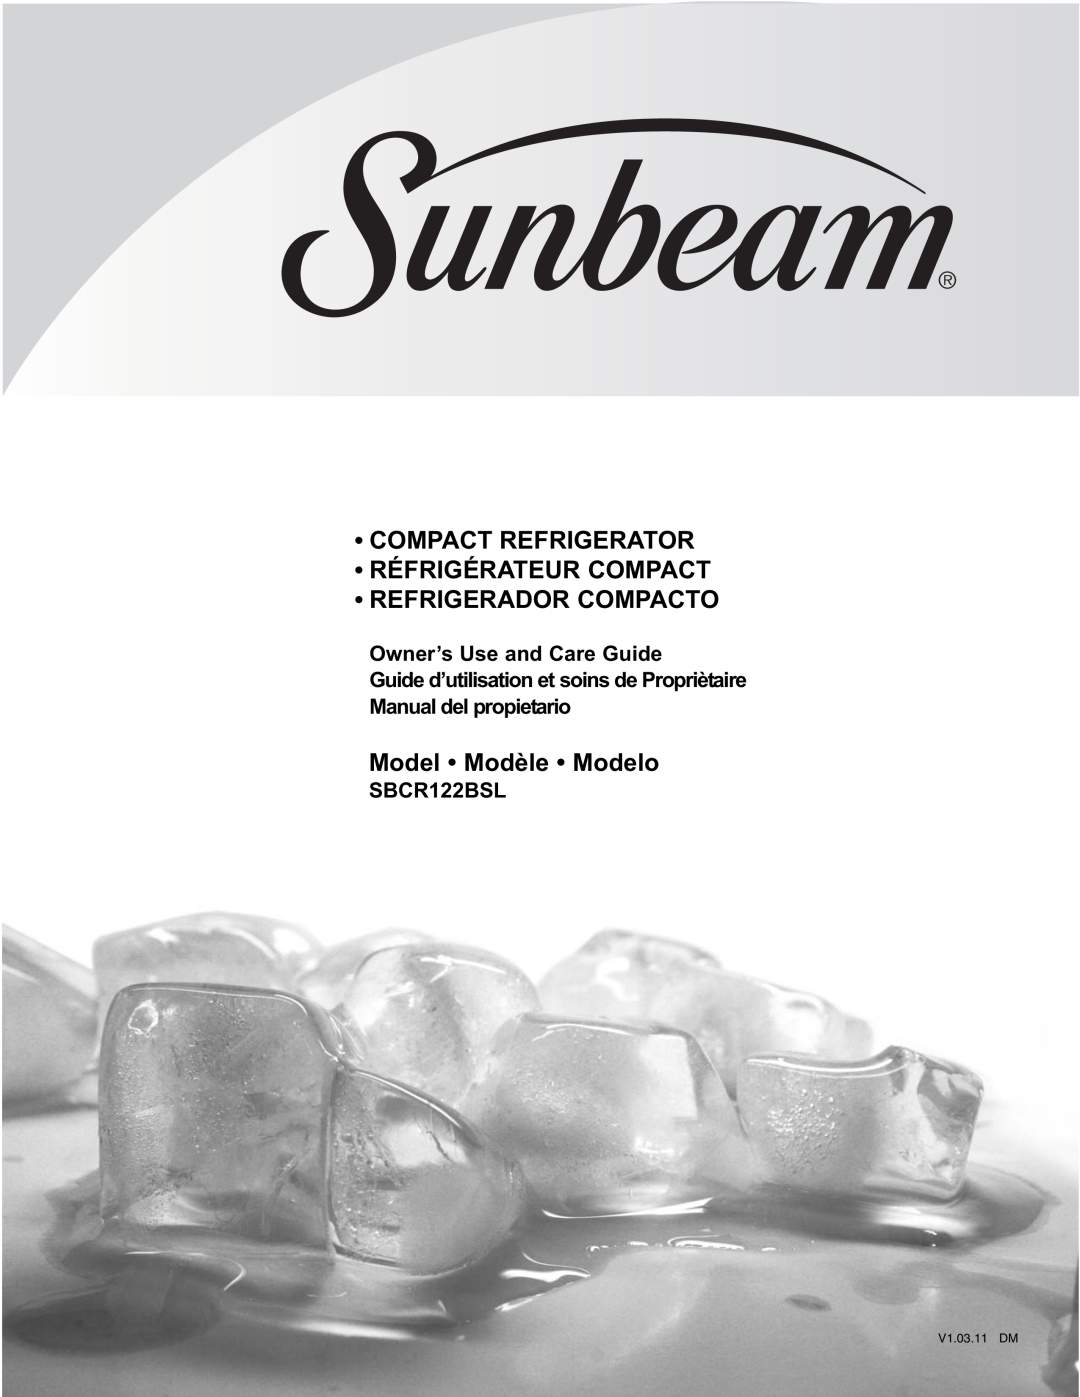 Sunbeam SBCR122BSL manual Owner’s Use and Care Guide, Compact Refrigerator Réfrigérateur Compact, Refrigerador Compacto 